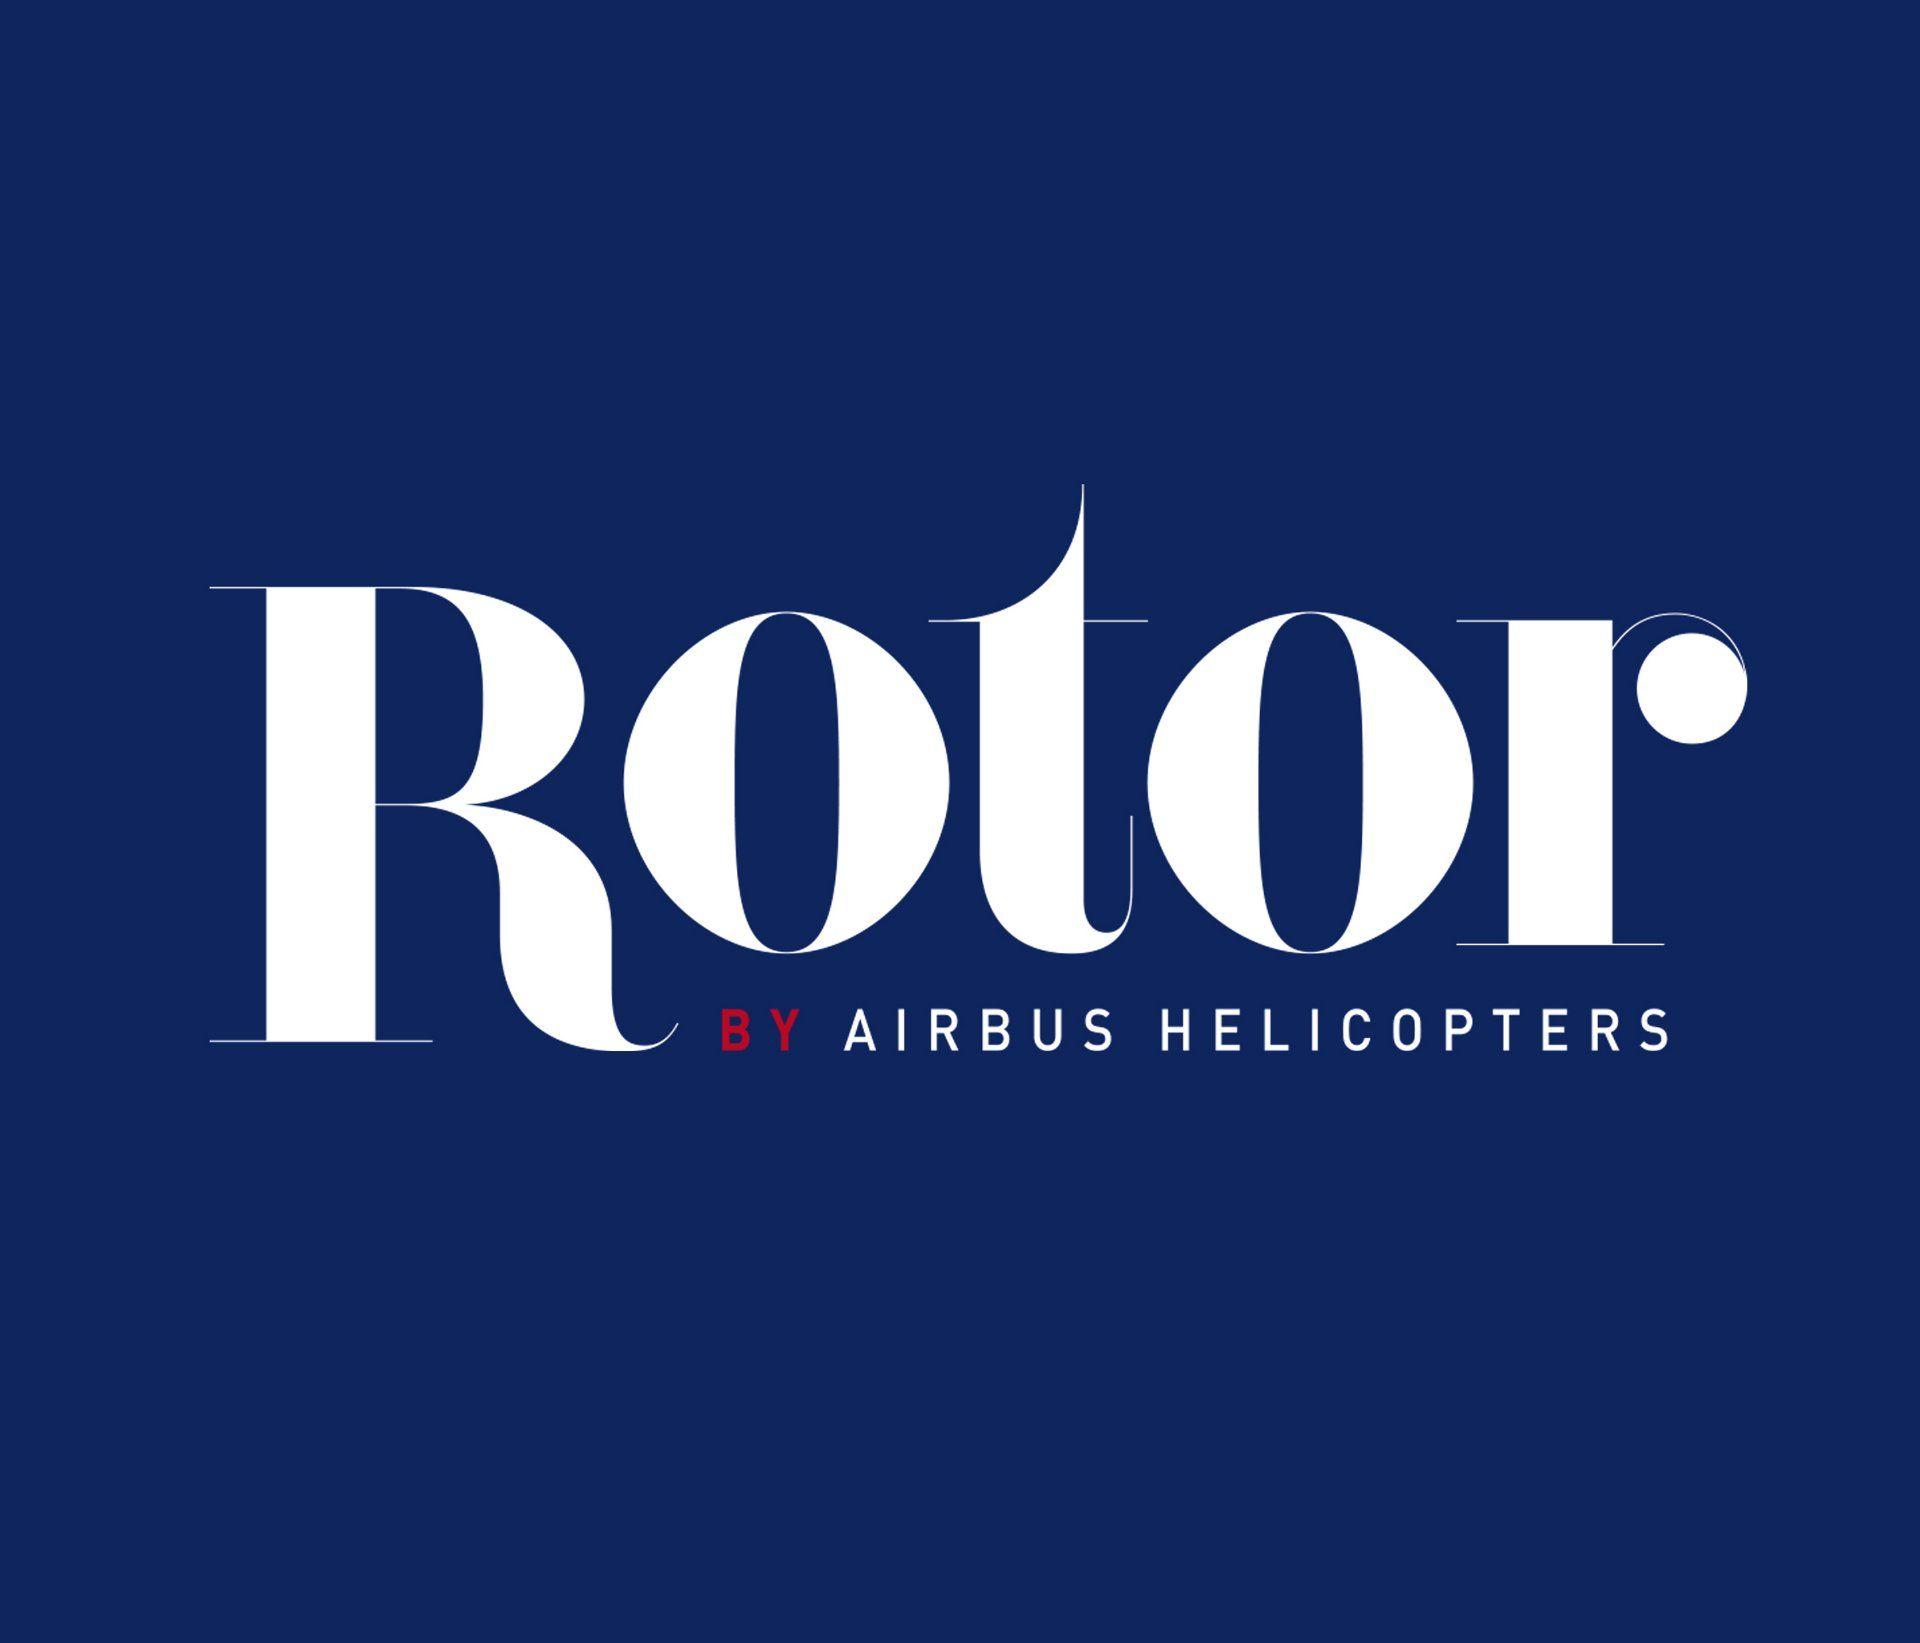 Eurocopter Logo - Helicopters